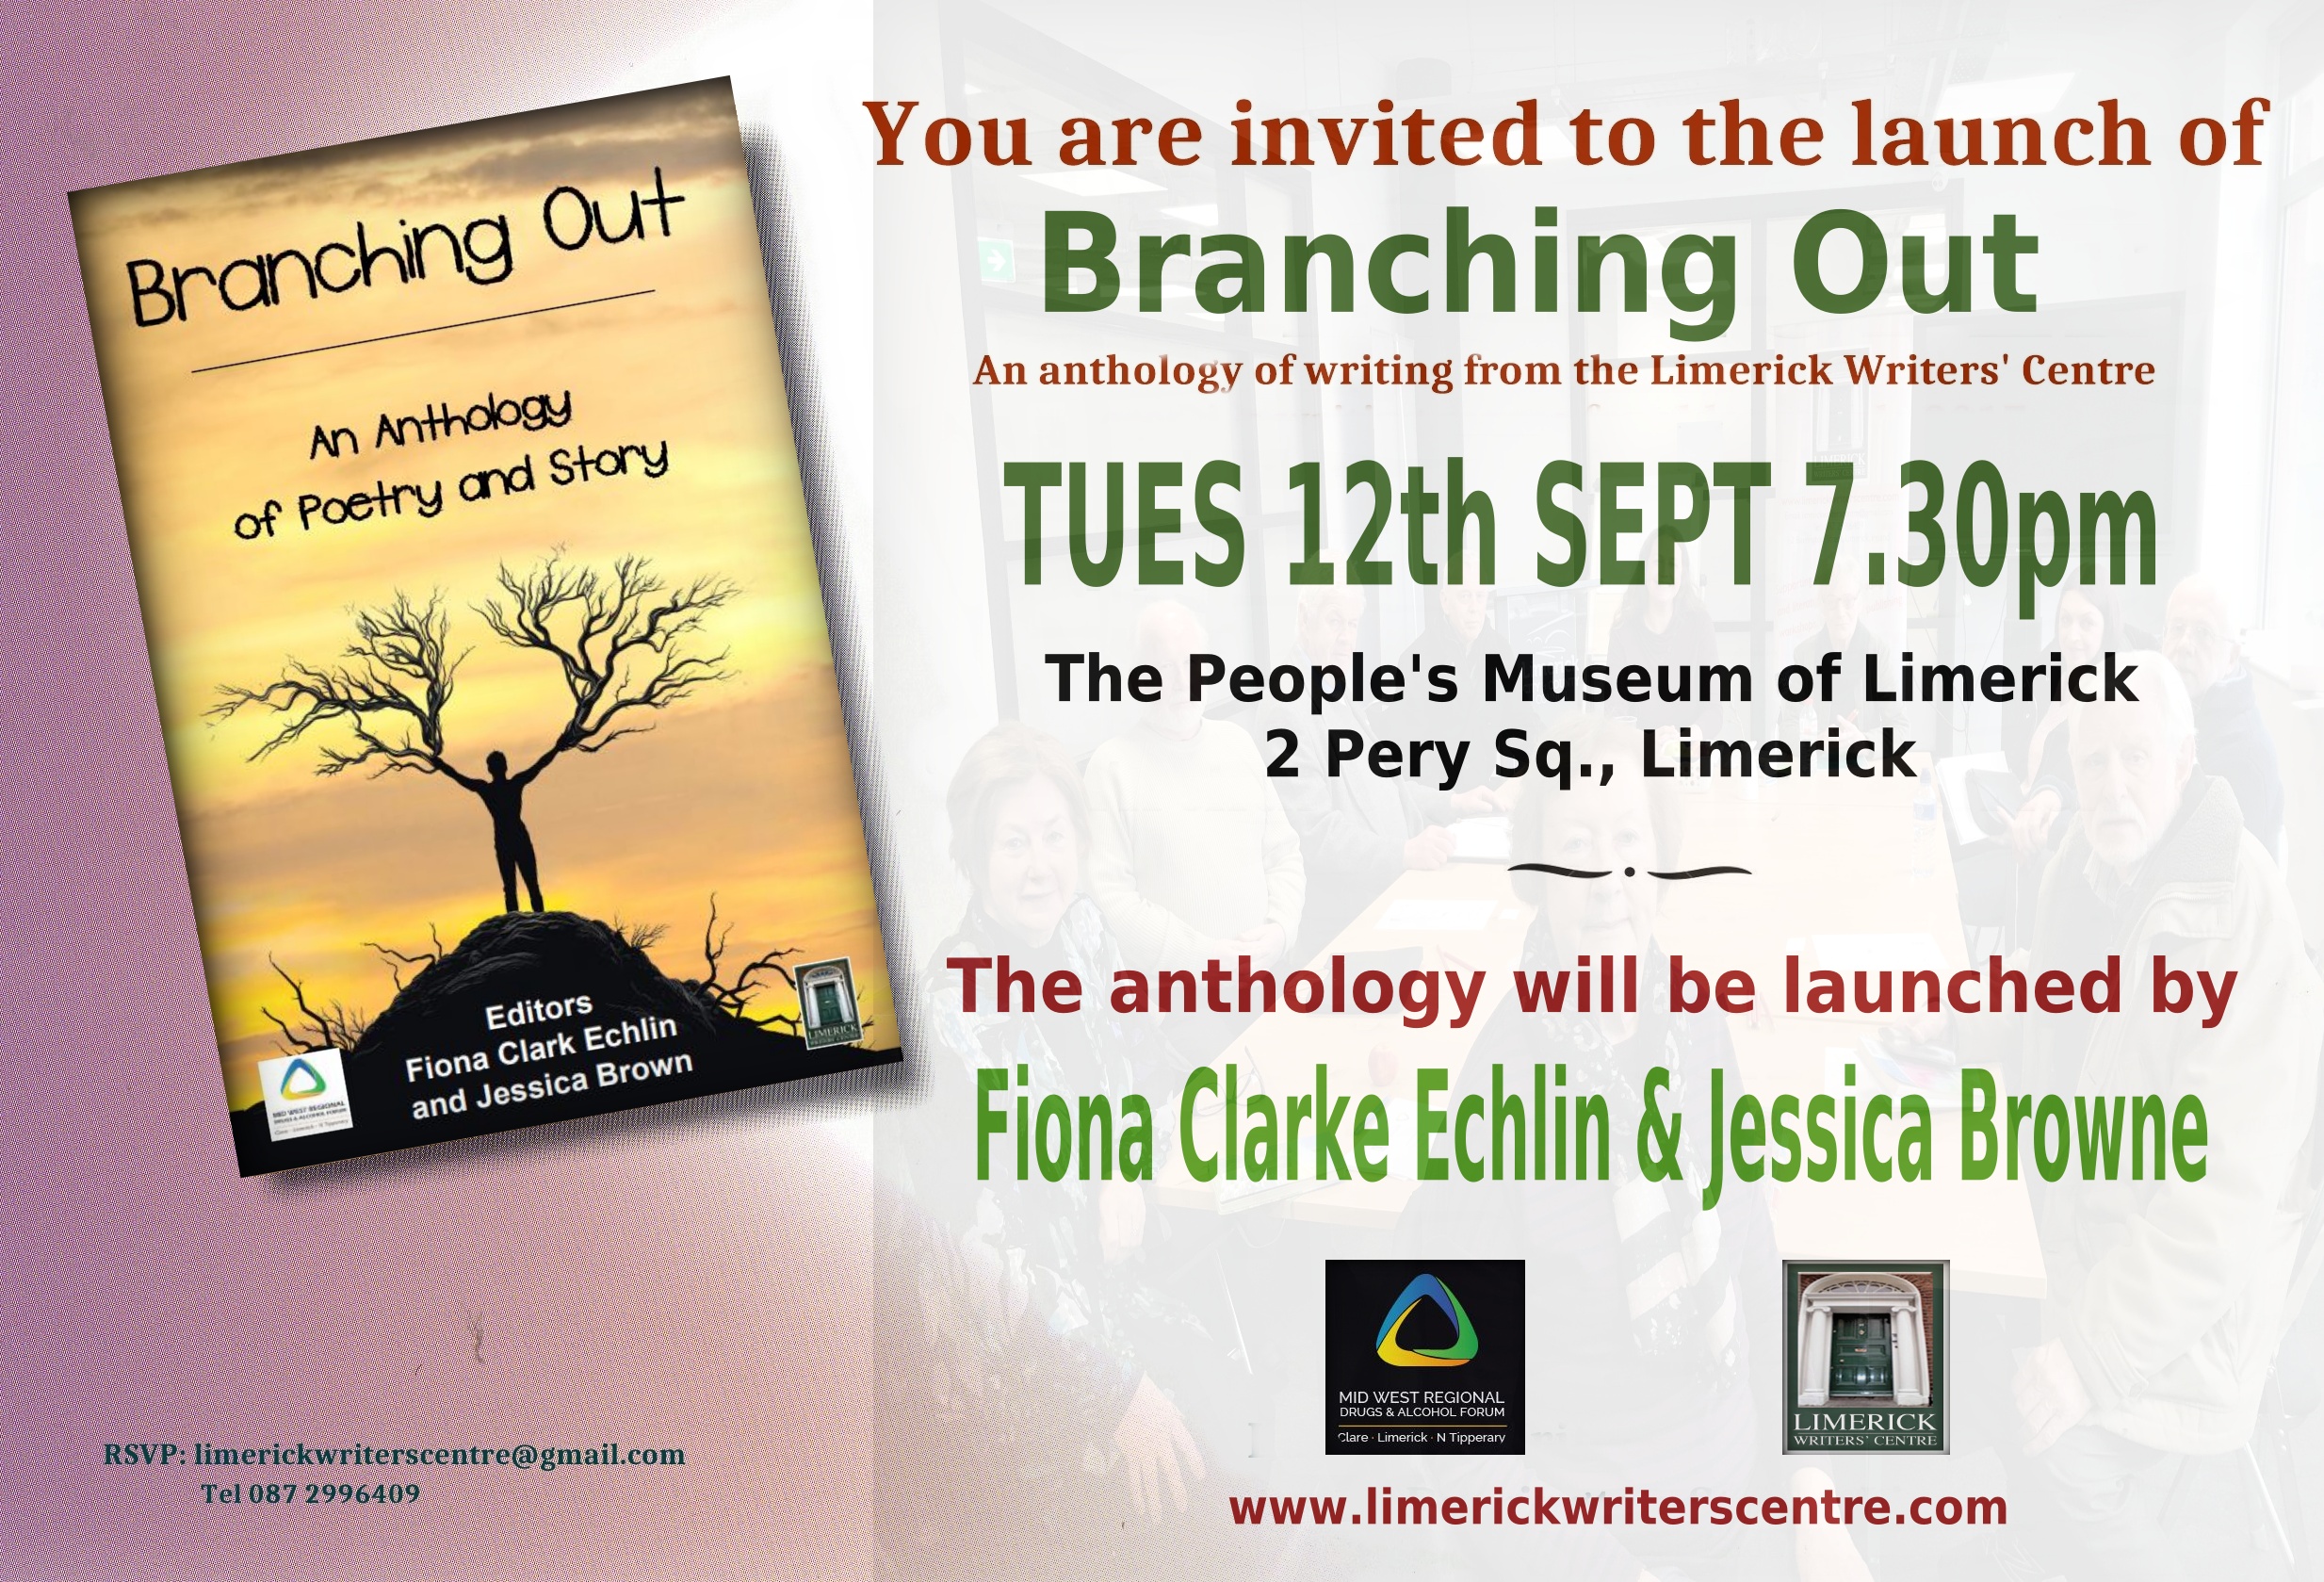 The Limerick Writers’ Centre announce 'Branching Out' launch, an anthology showcasing creative compositions